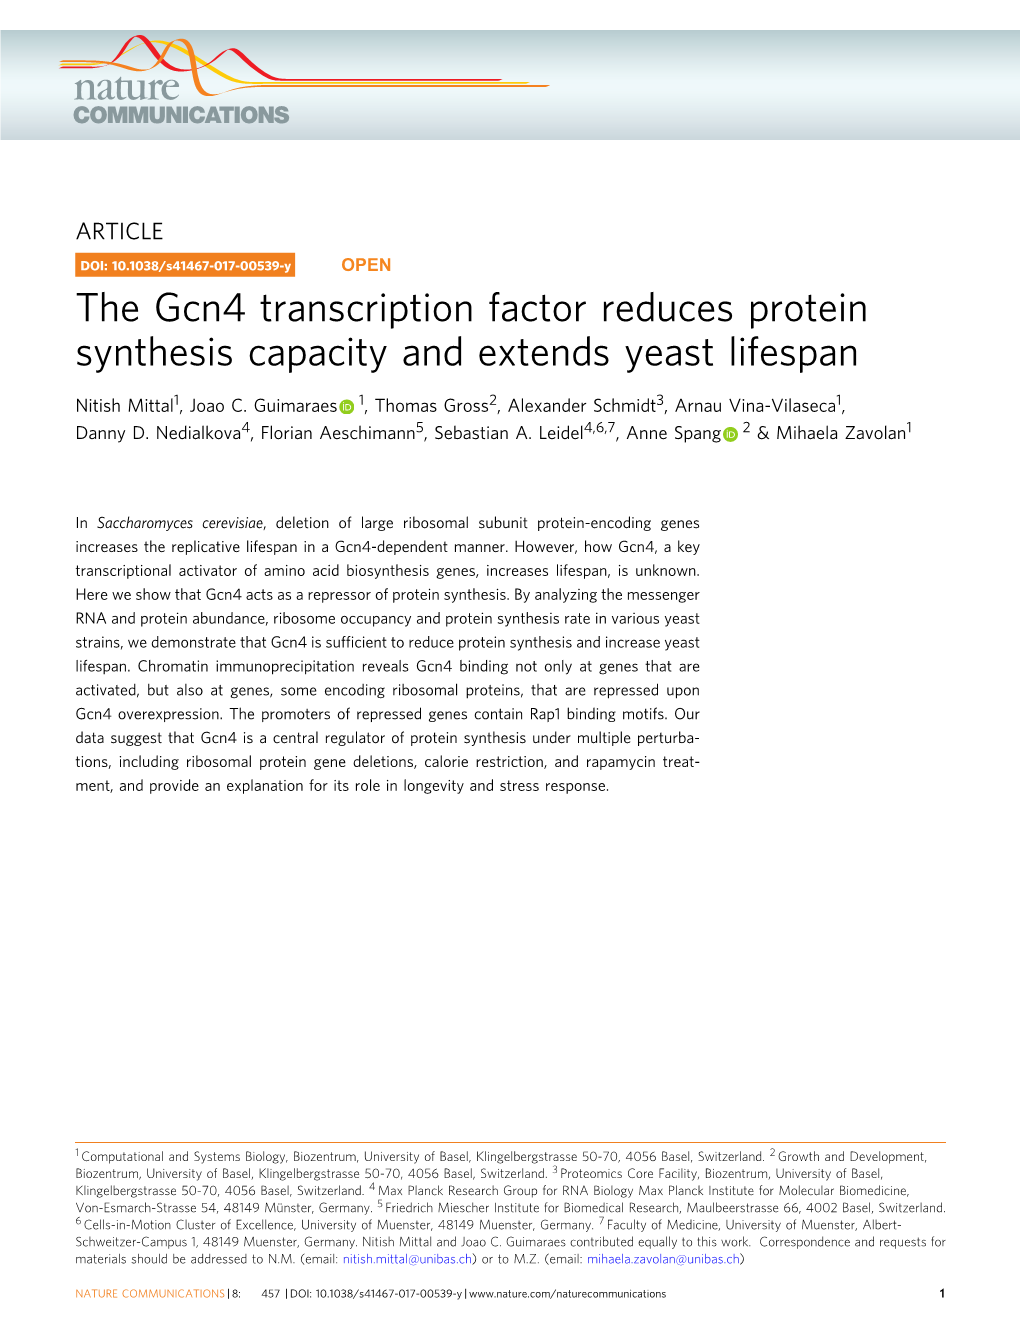 The Gcn4 Transcription Factor Reduces Protein Synthesis Capacity and Extends Yeast Lifespan